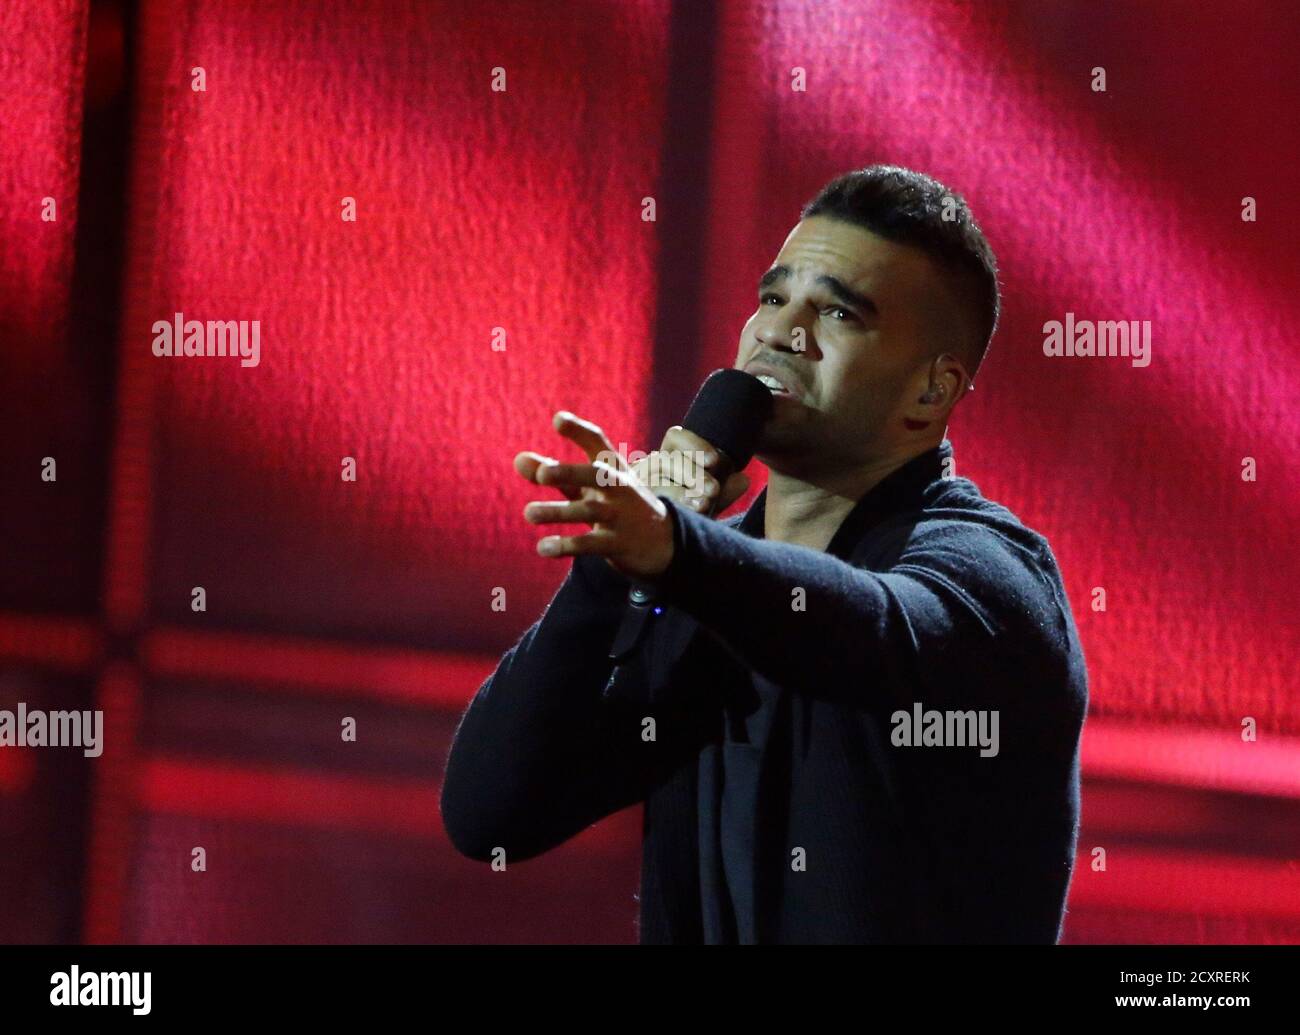 Singer Andras Kallay-Saunders representing Hungary performs the song "Running" the grand final of the 59th Song Contest at the B&W Hallerne in Copenhagen May 10, 2014. REUTERS/Tobias Schwarz (DENMARK -